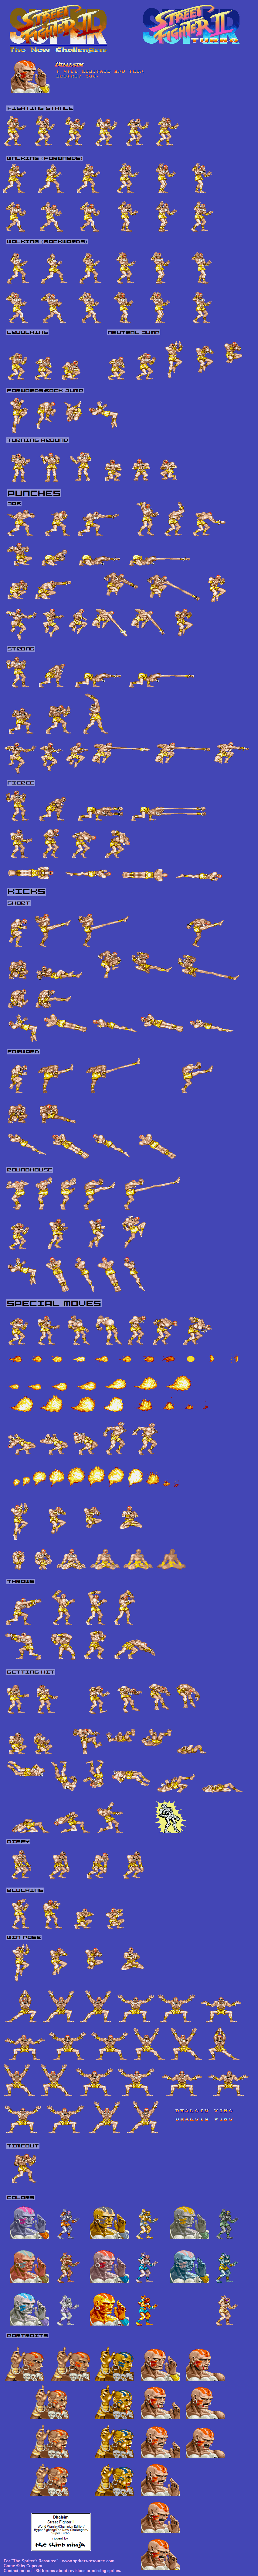 Street Fighter 2 Turbo moves (corrected) : r/snes